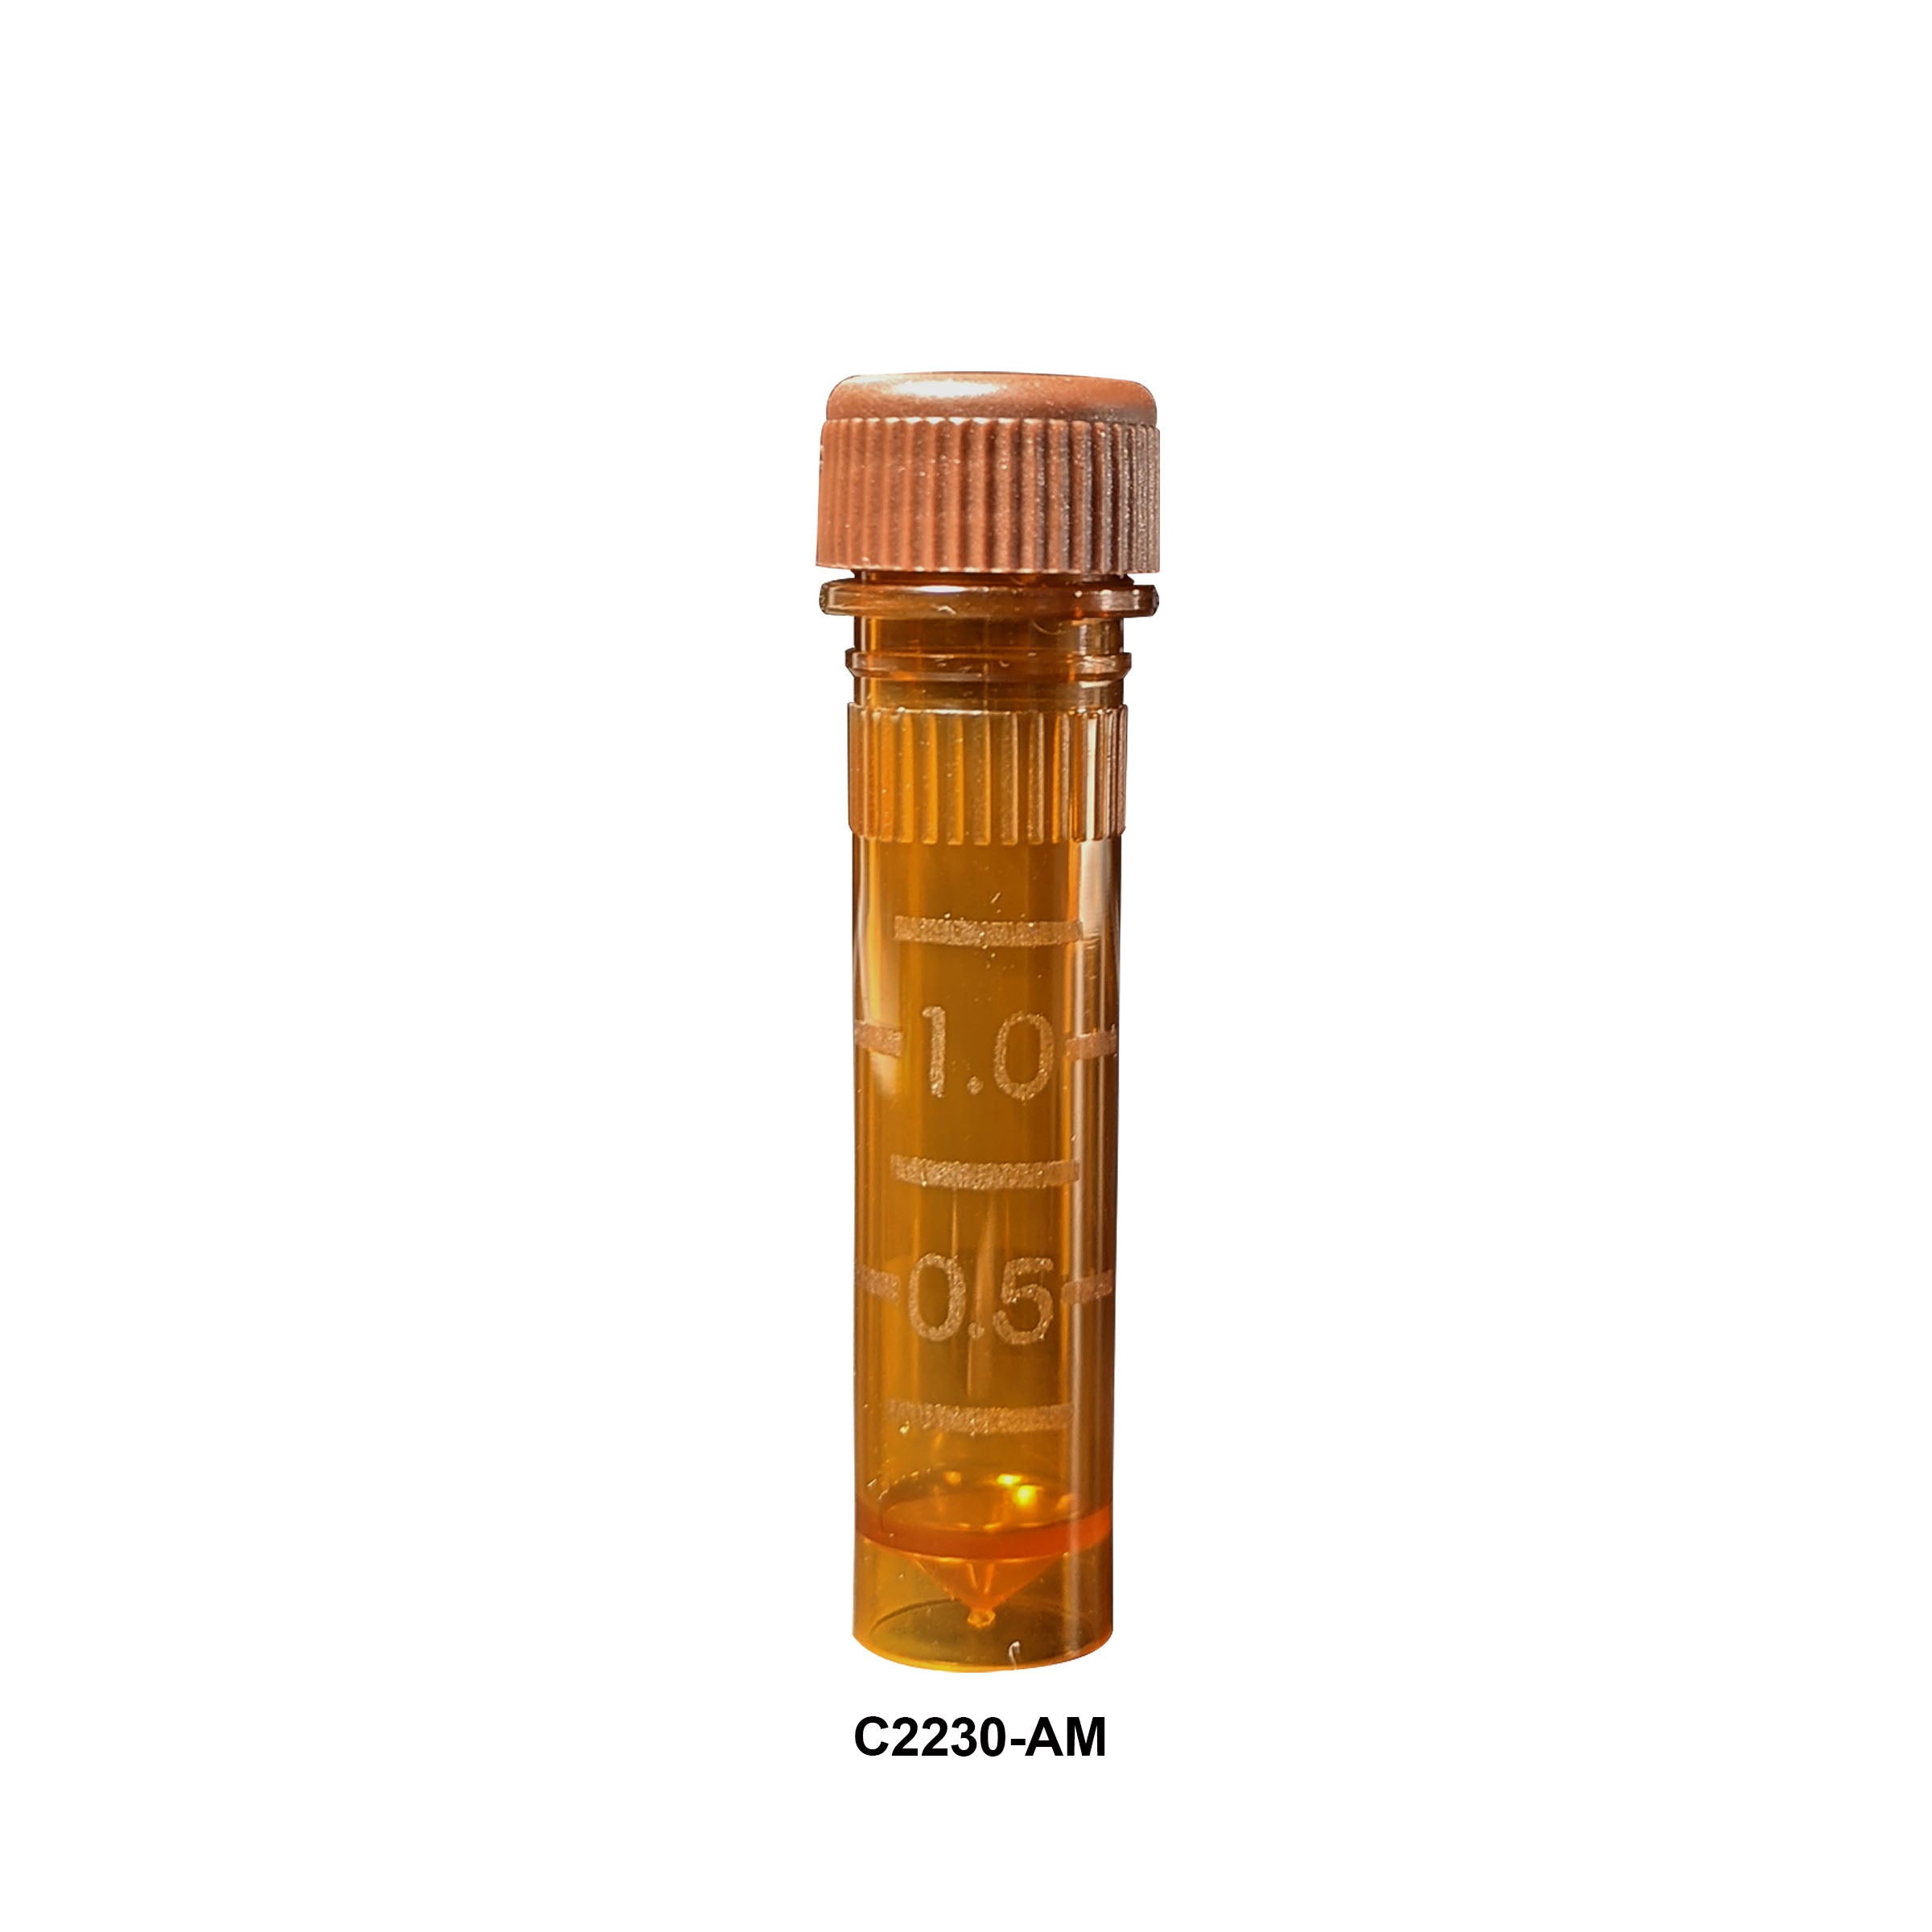 MTC Bio C2230-AM, Screw-Cap Microtubes, 2.0ml, Amber Color, with O-Ring, Sterile, 100 Per Bag, 1000/case